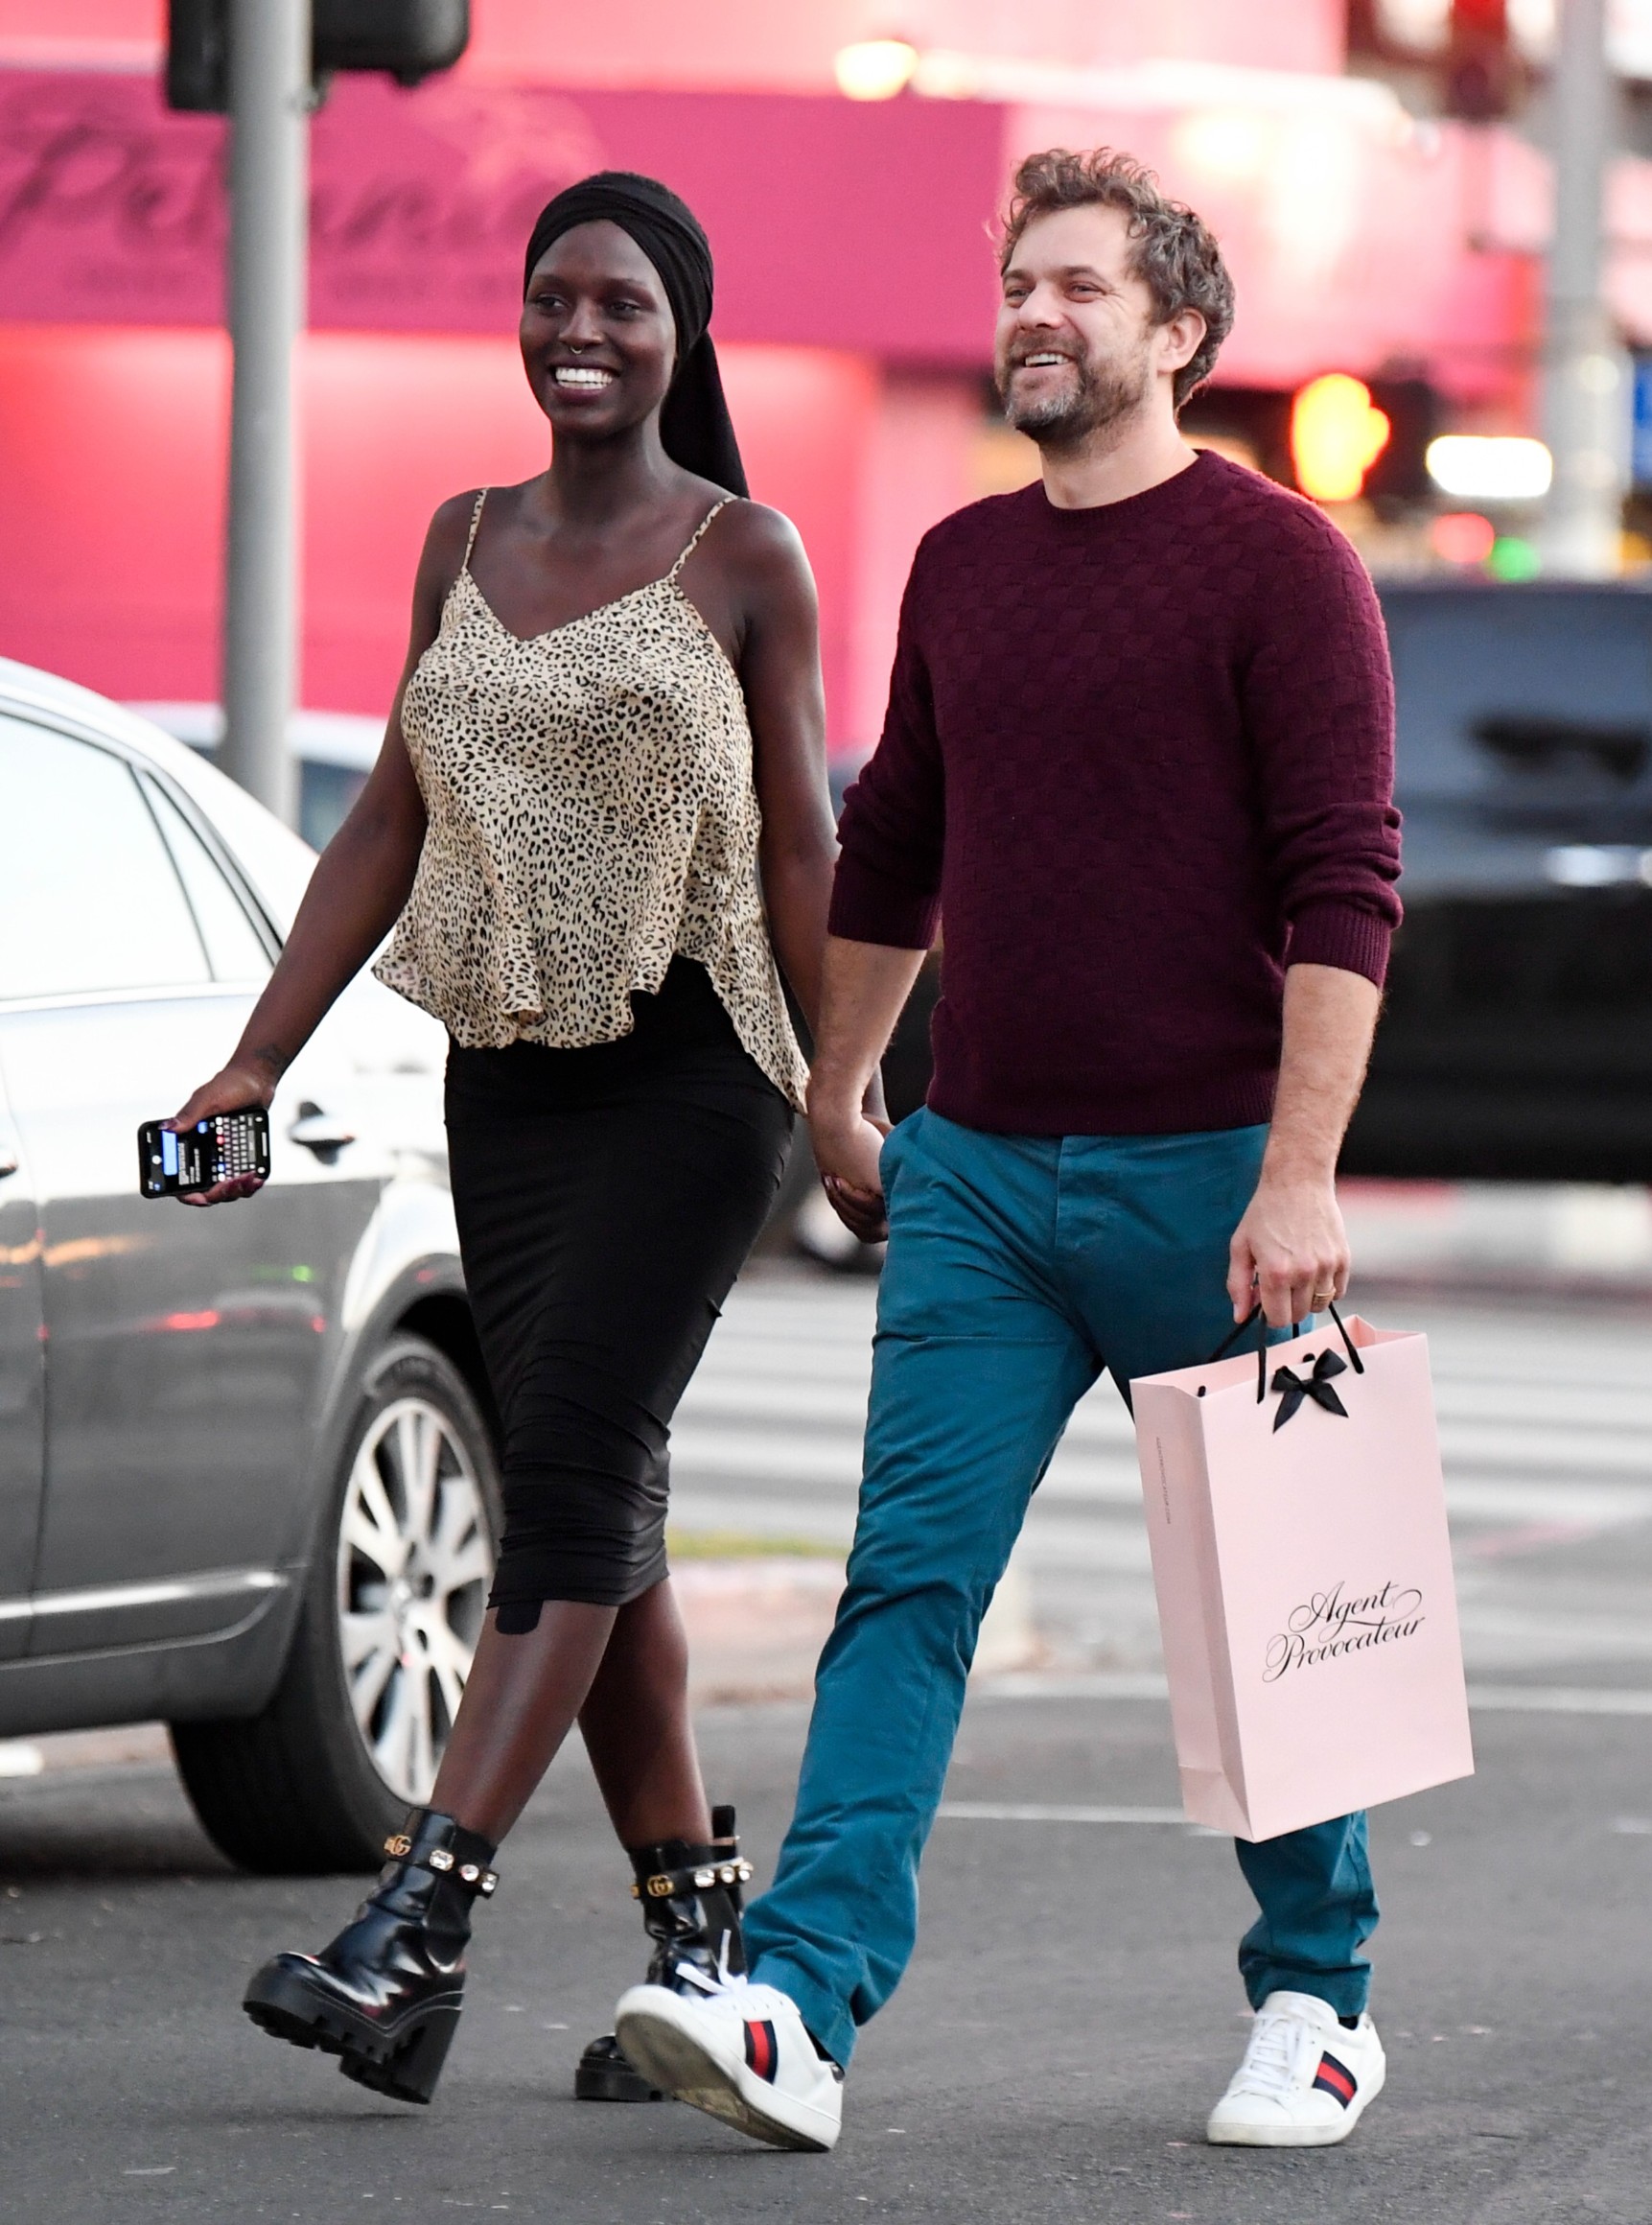 02/17/2020 EXCLUSIVE: Joshua Jackson and Jodie Turner-Smith look like the perfect couple in Los Angeles. The 41 year old actor and his girlfriend held hands and smiled broadly while spotted out shopping. Jackson wore a burgundy sweater, teal trousers, and Gucci trainers. Turner-Smith covered her baby bump in a leopard print blouse paired with a black skirt and Gucci boots., Image: 499153771, License: Rights-managed, Restrictions: Exclusive NO usage without agreed price and terms. Please contact sales@theimagedirect.com, Model Release: no, Credit line: TheImageDirect.com / The Image Direct / Profimedia